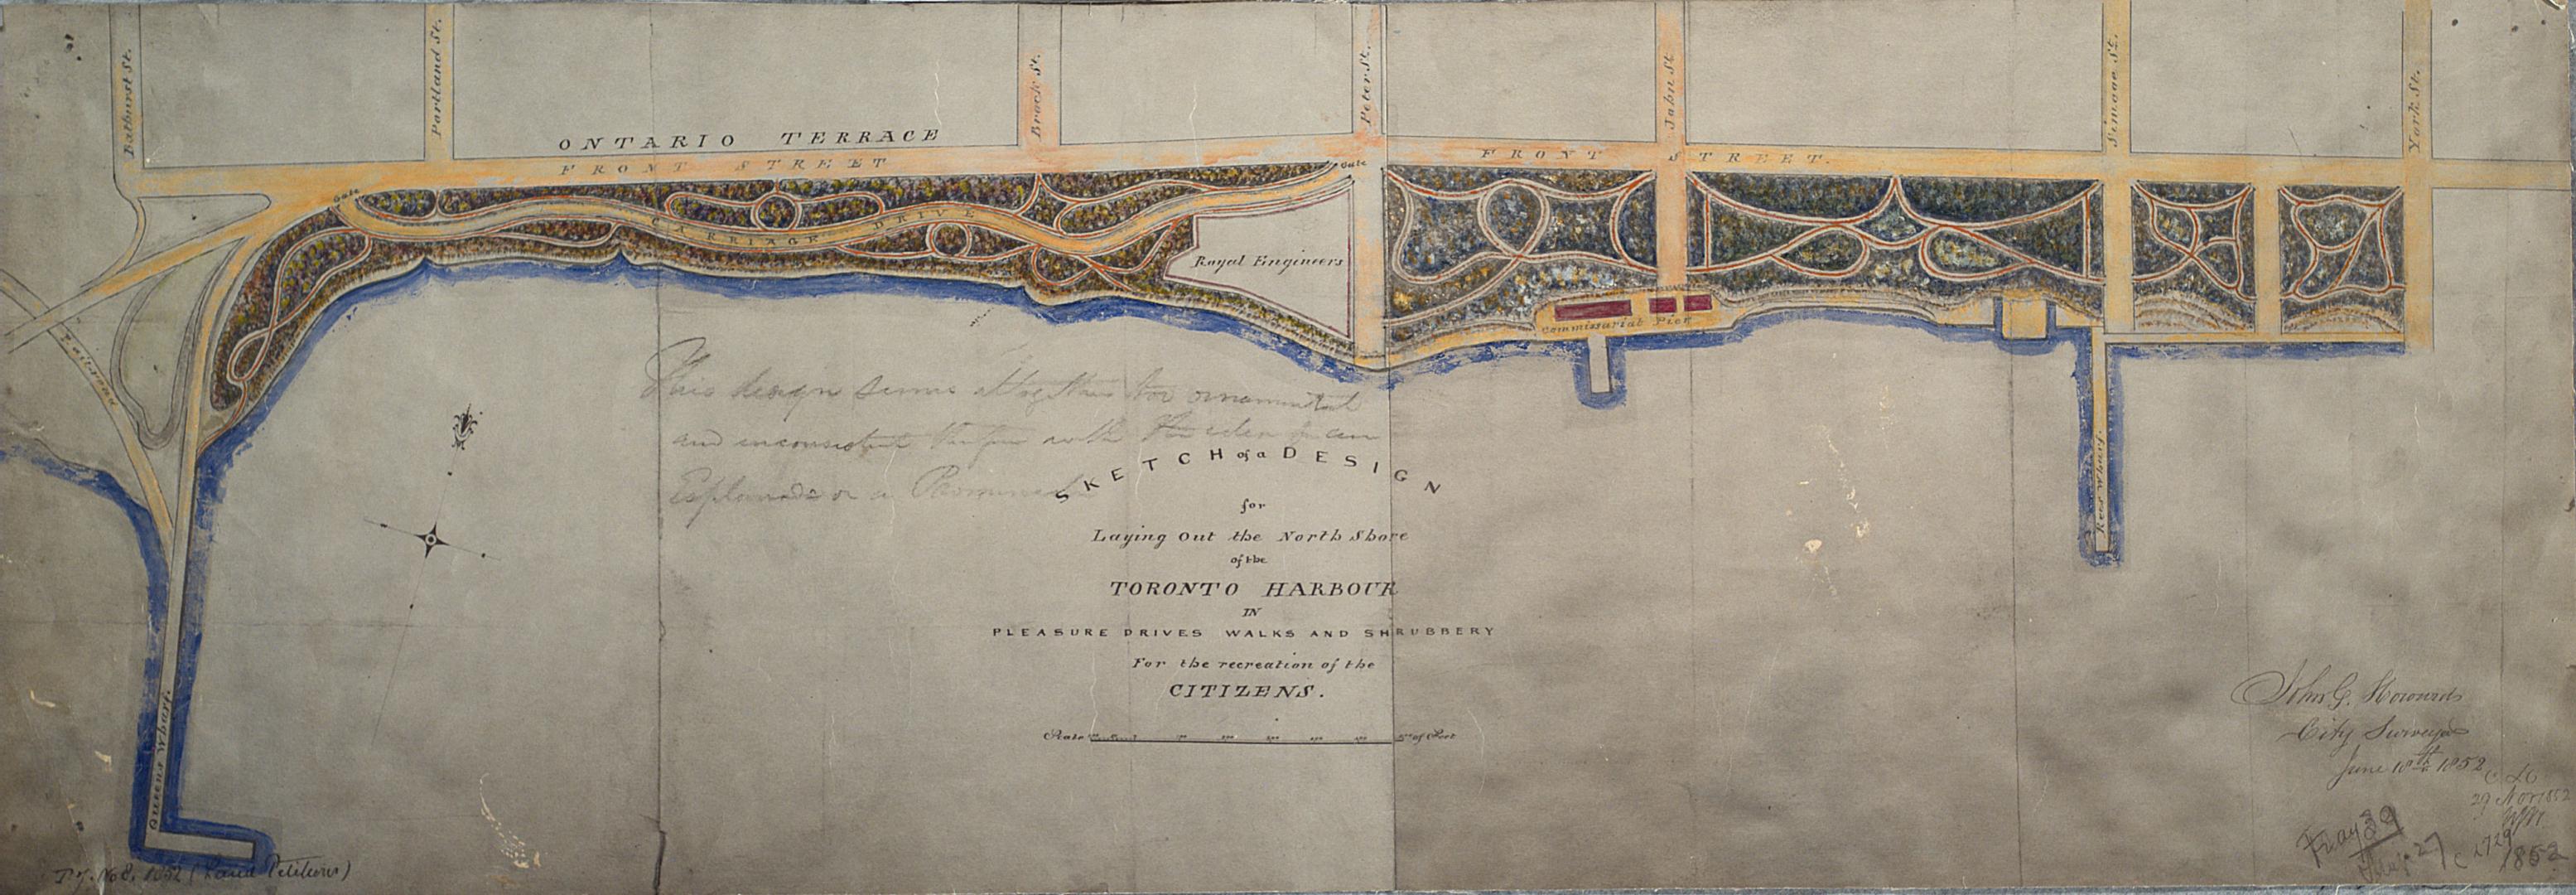 Image shows a Toronto Harbour map.